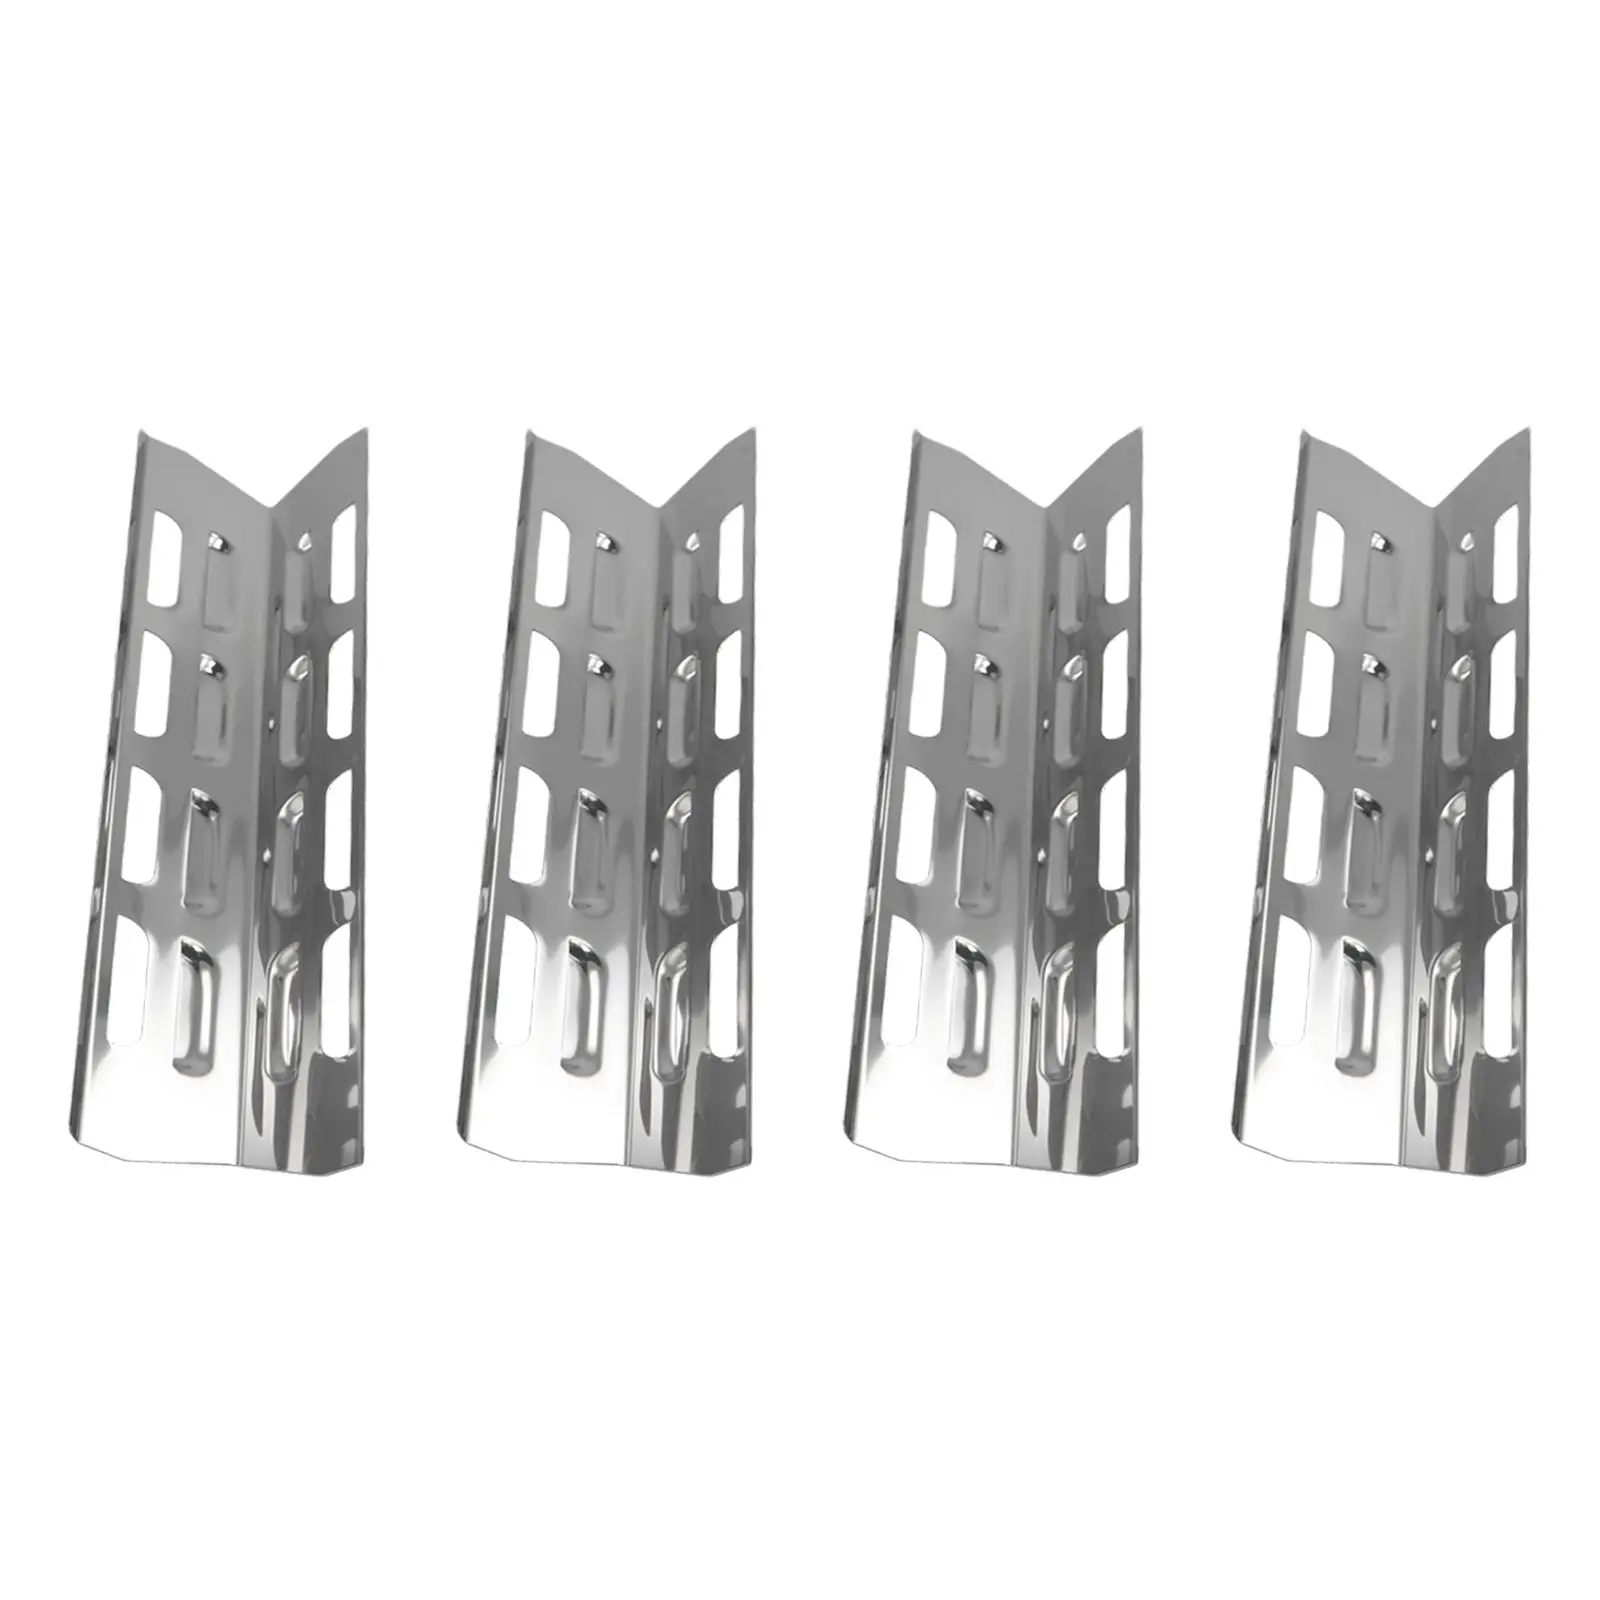 4Pcs Stainless Steel Barbecue Gas Grill Oven Heat Plate Heat Tents Deflector Burners Cover Accessory Camping Tool